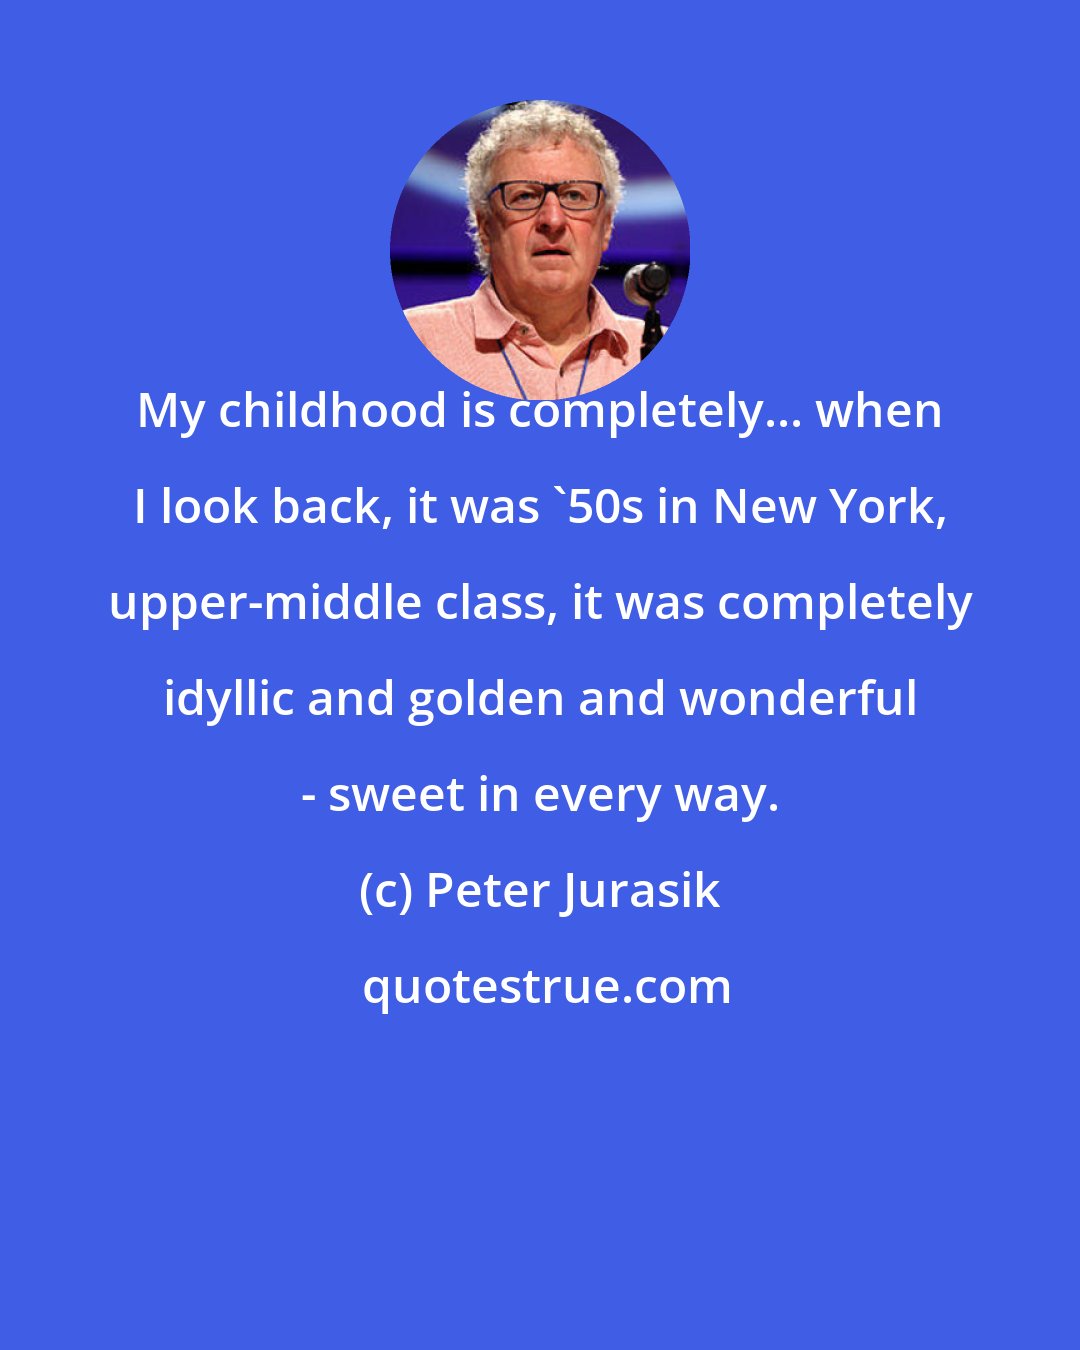 Peter Jurasik: My childhood is completely... when I look back, it was '50s in New York, upper-middle class, it was completely idyllic and golden and wonderful - sweet in every way.